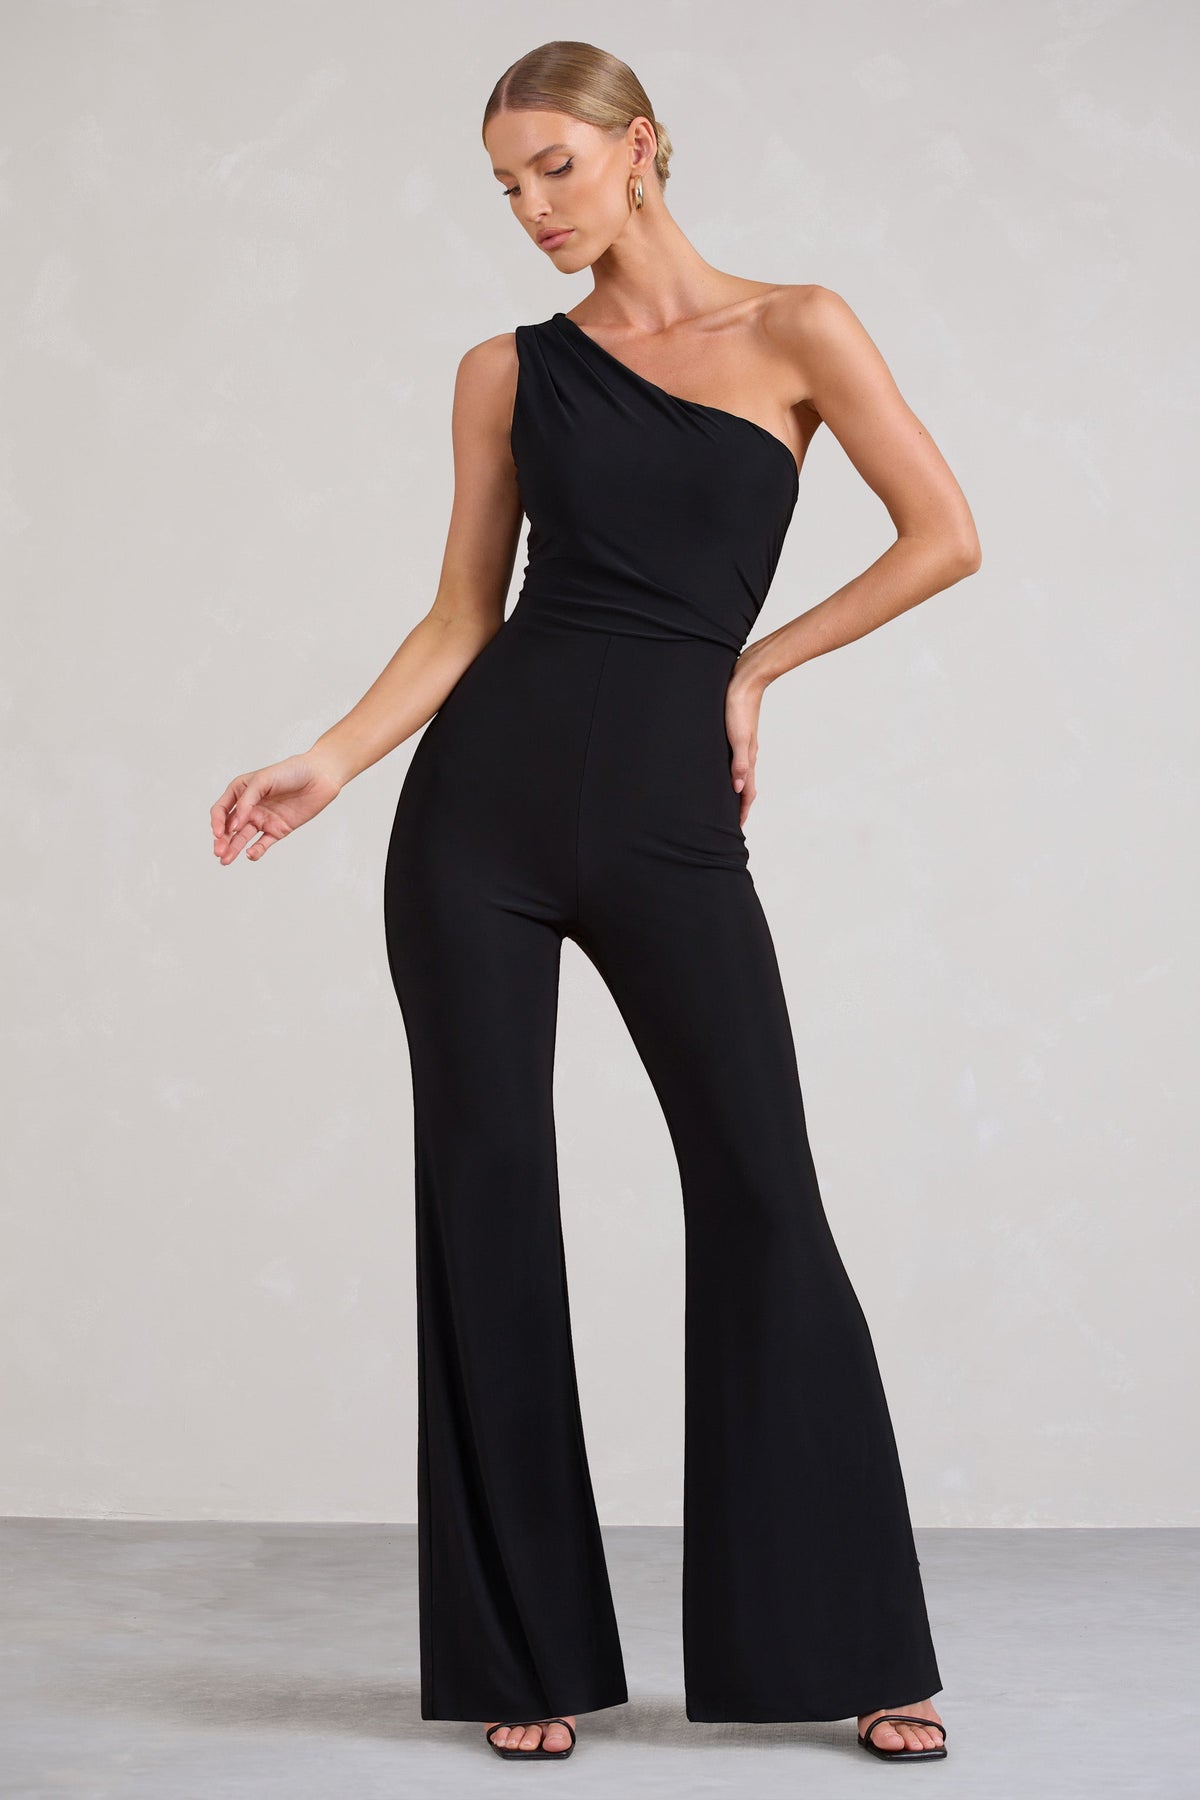 One Shoulder Jumpsuit by One33 Social for $66 | Rent the Runway